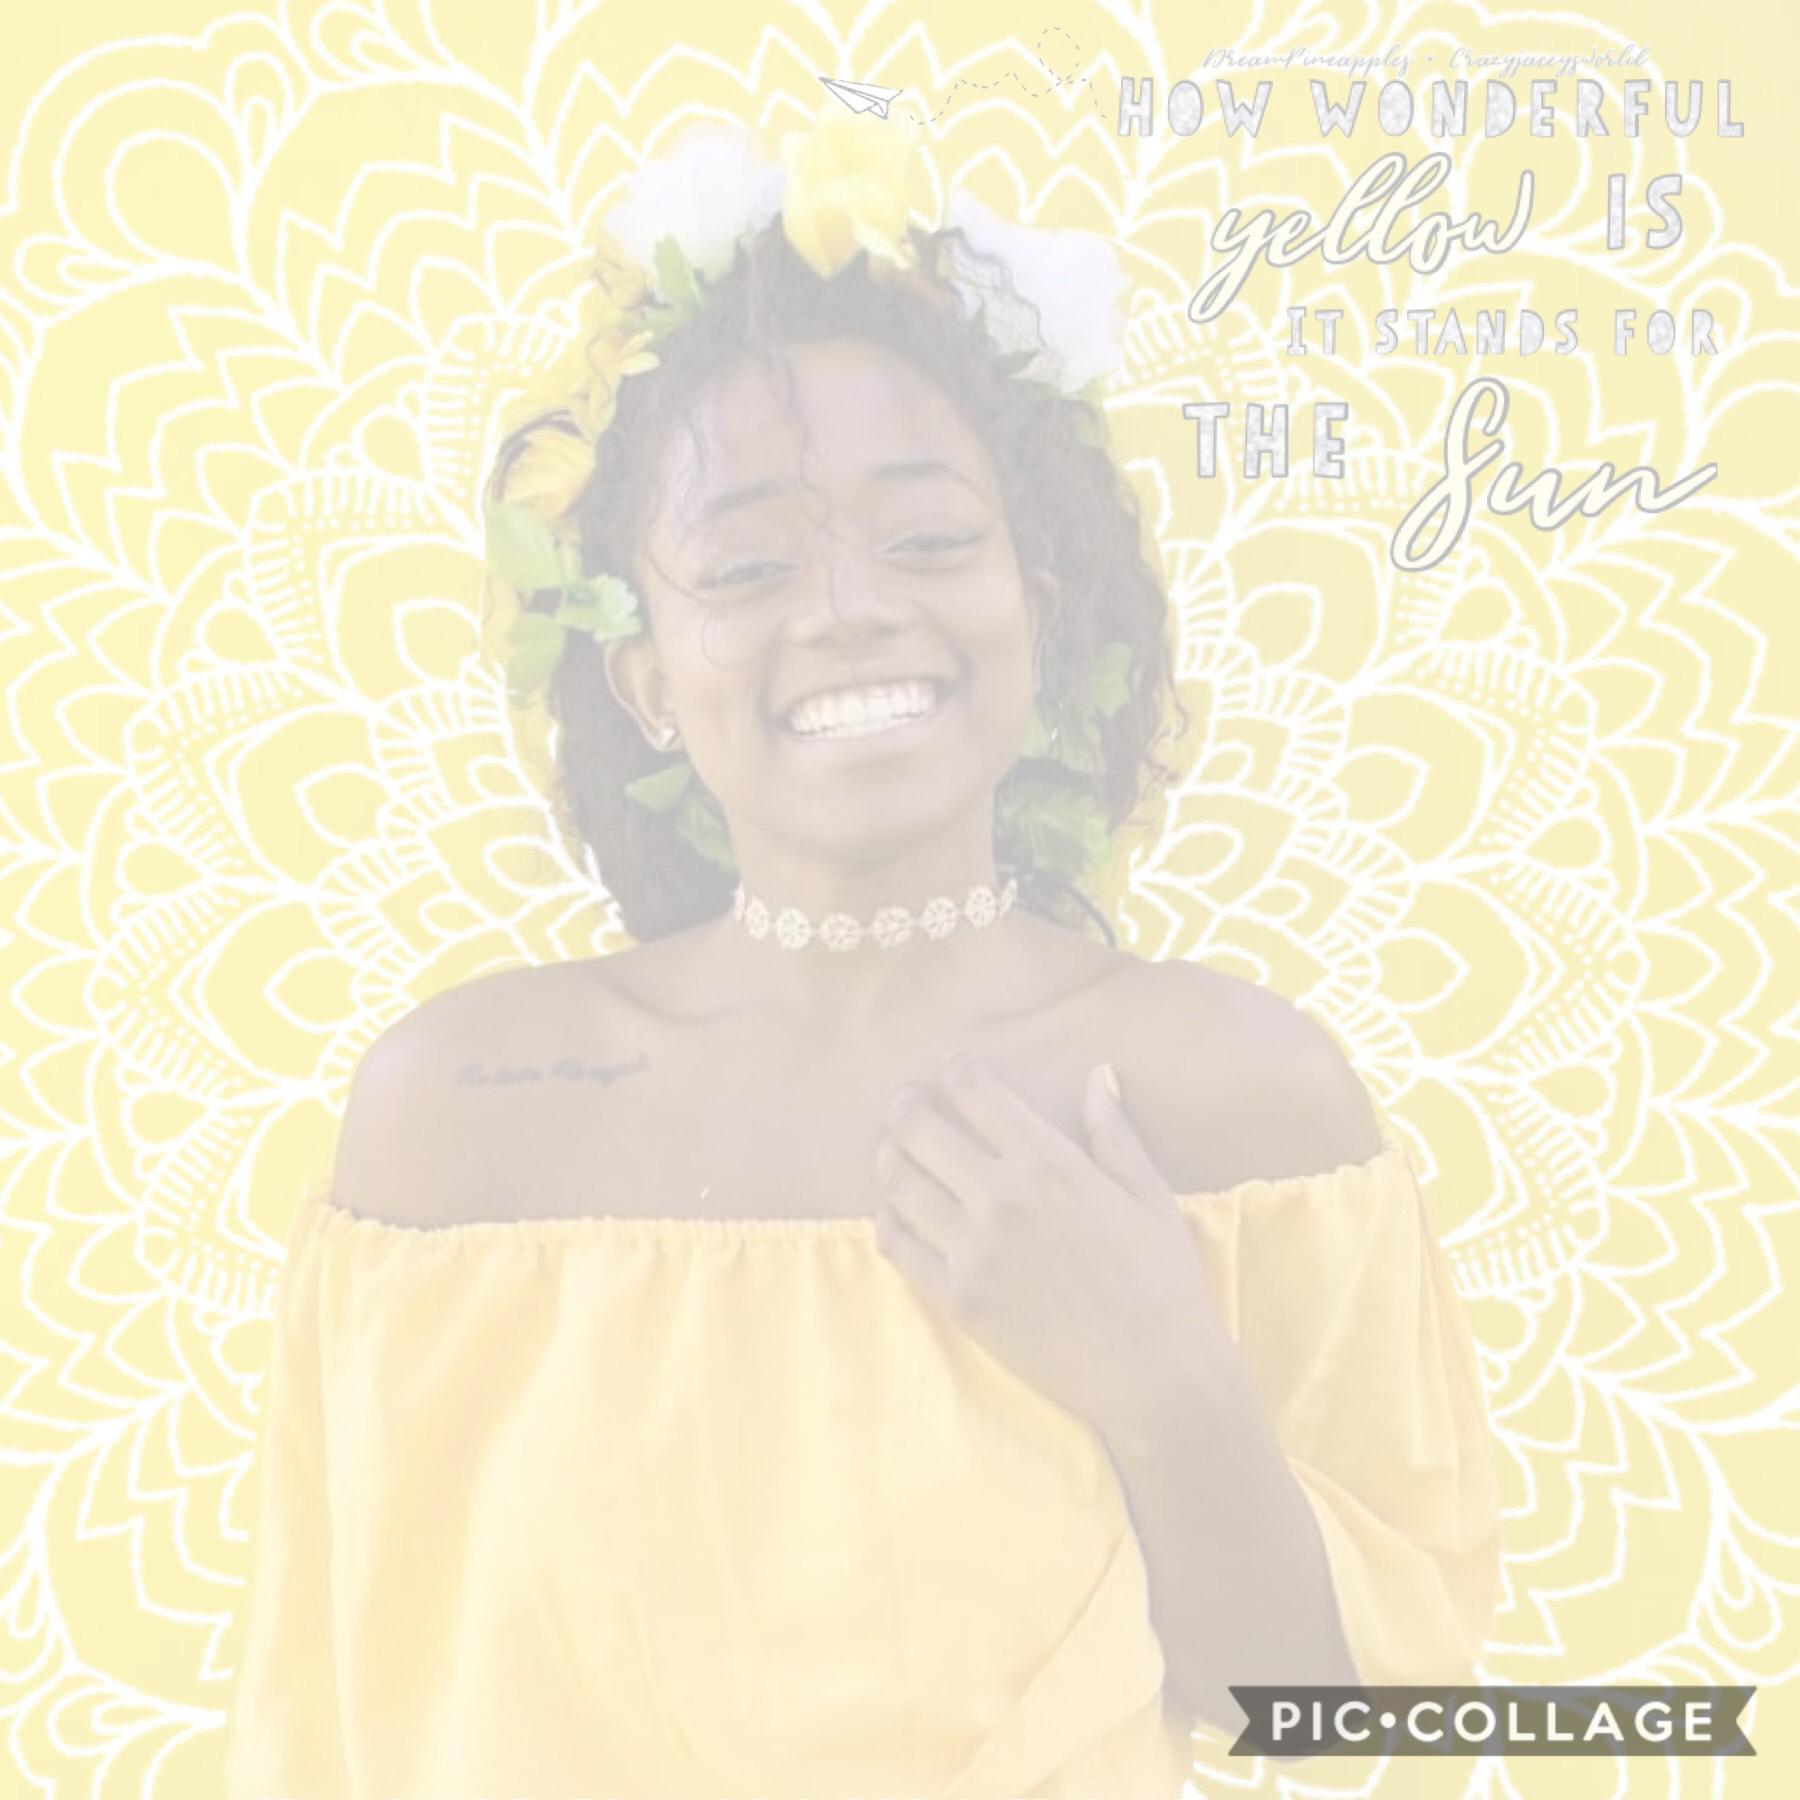 ✨TAP✨
Collab with the amazing, talented, and kind... Crazyjaceysworld!! Go follow her now:) Also why am I already longing for  summer? I’m making a box of sunshine for my bestie, any ideas?
QOTD: Favorite color?
AOTD: 💗 or 💛